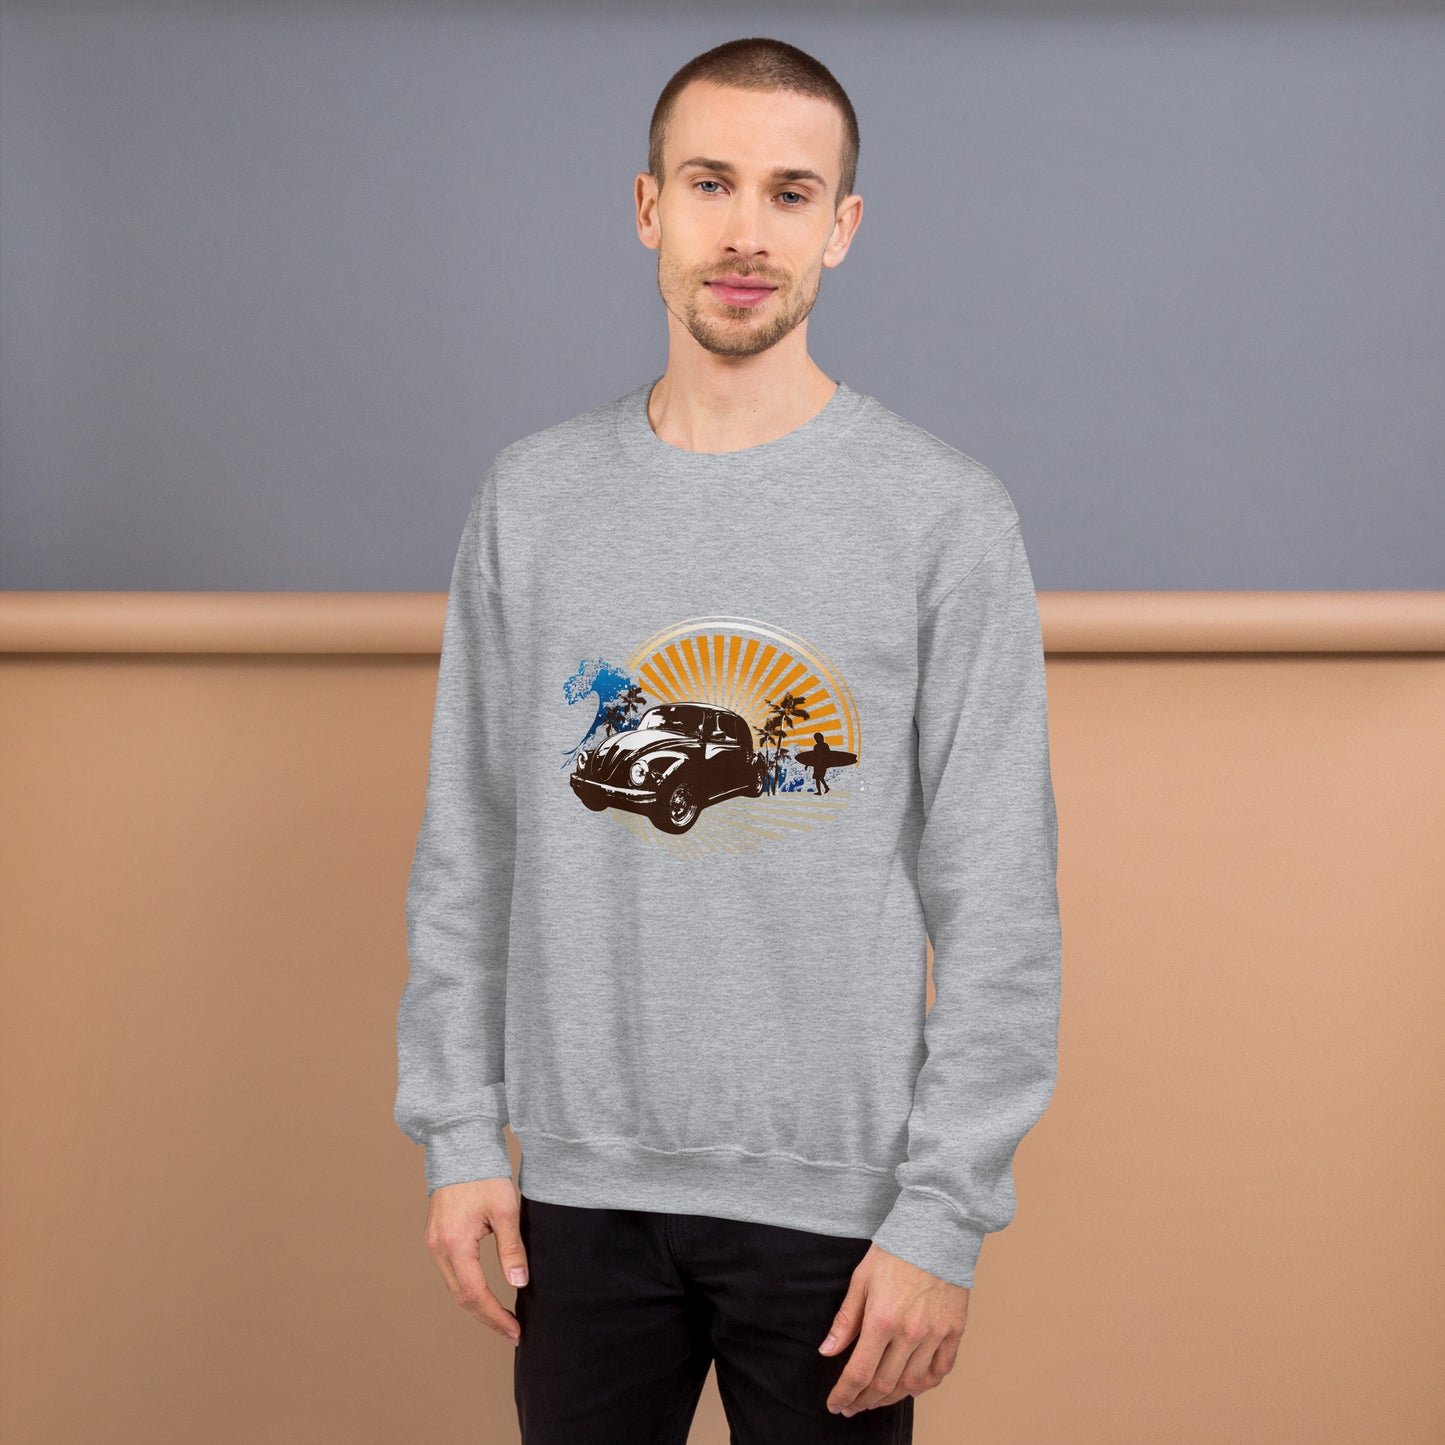 Men with grey sweatshirt with sunset and beetle car